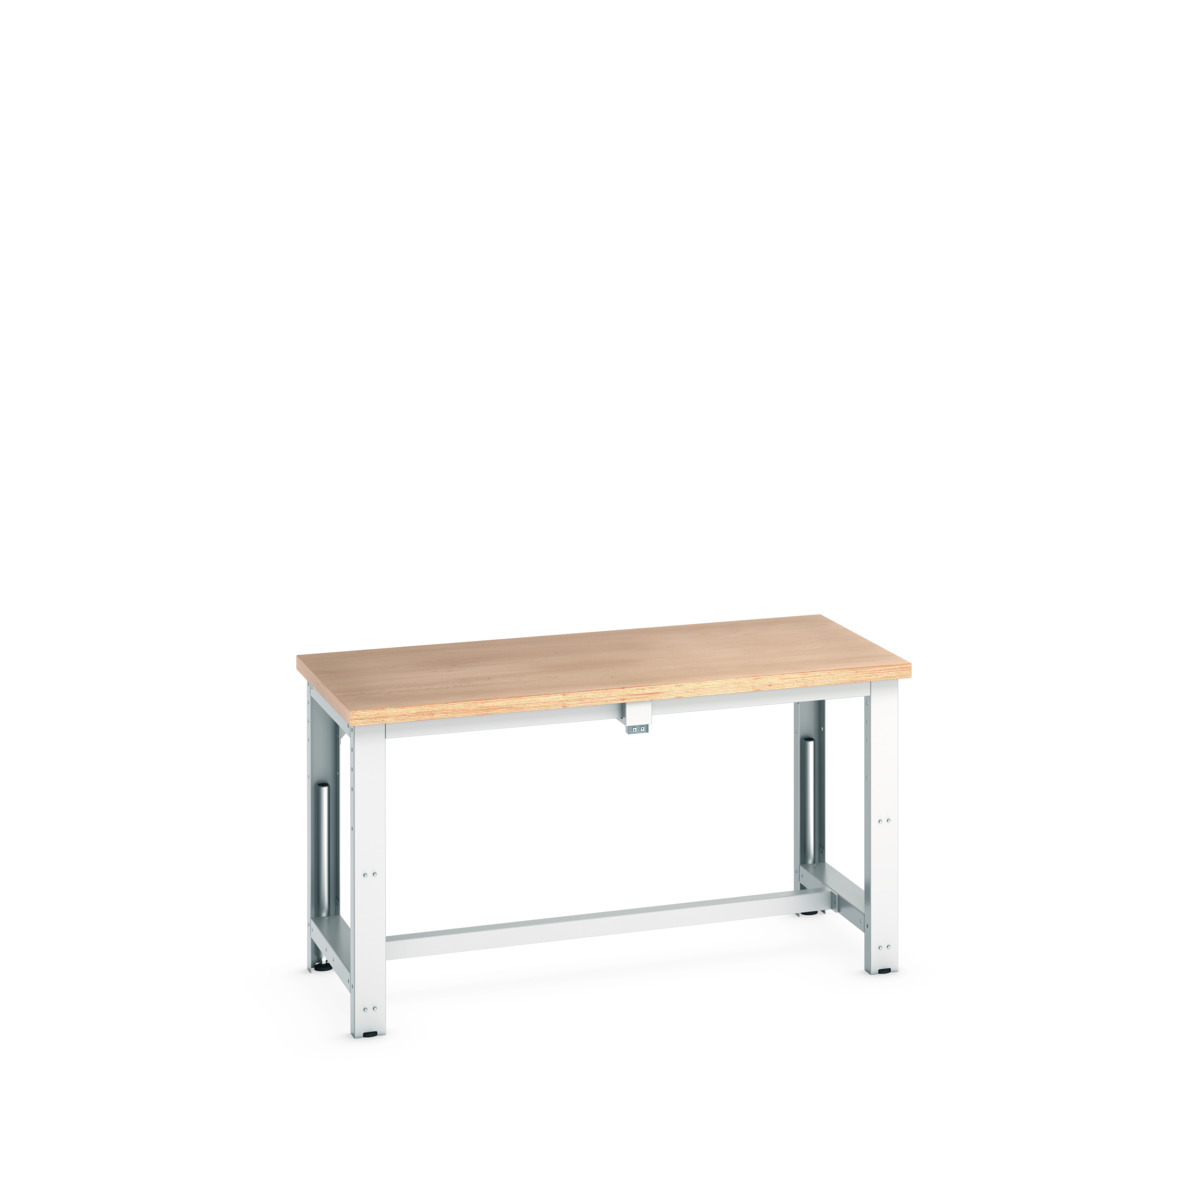 41003566. - cubio stepless adjustable height bench